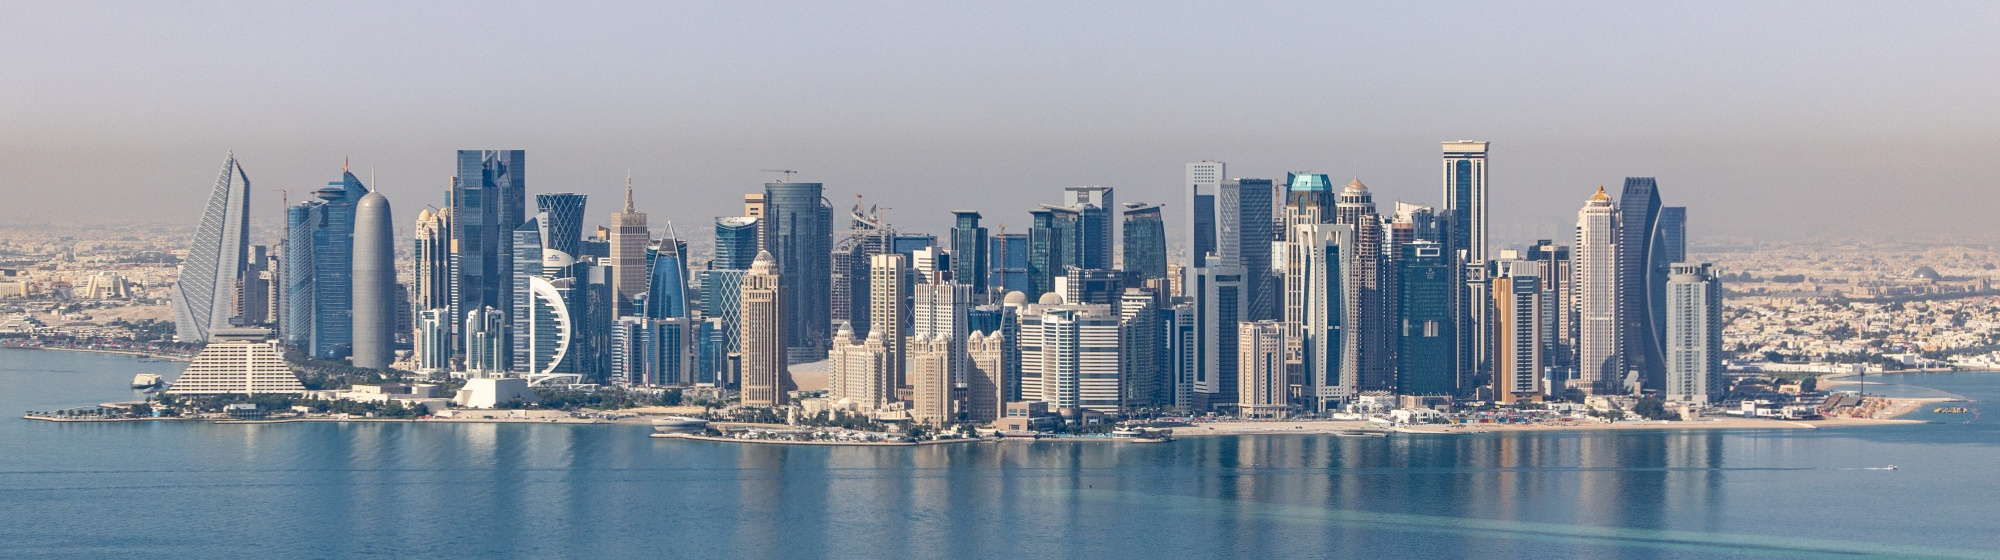 View of Doha's skyline with business buildings and hotels